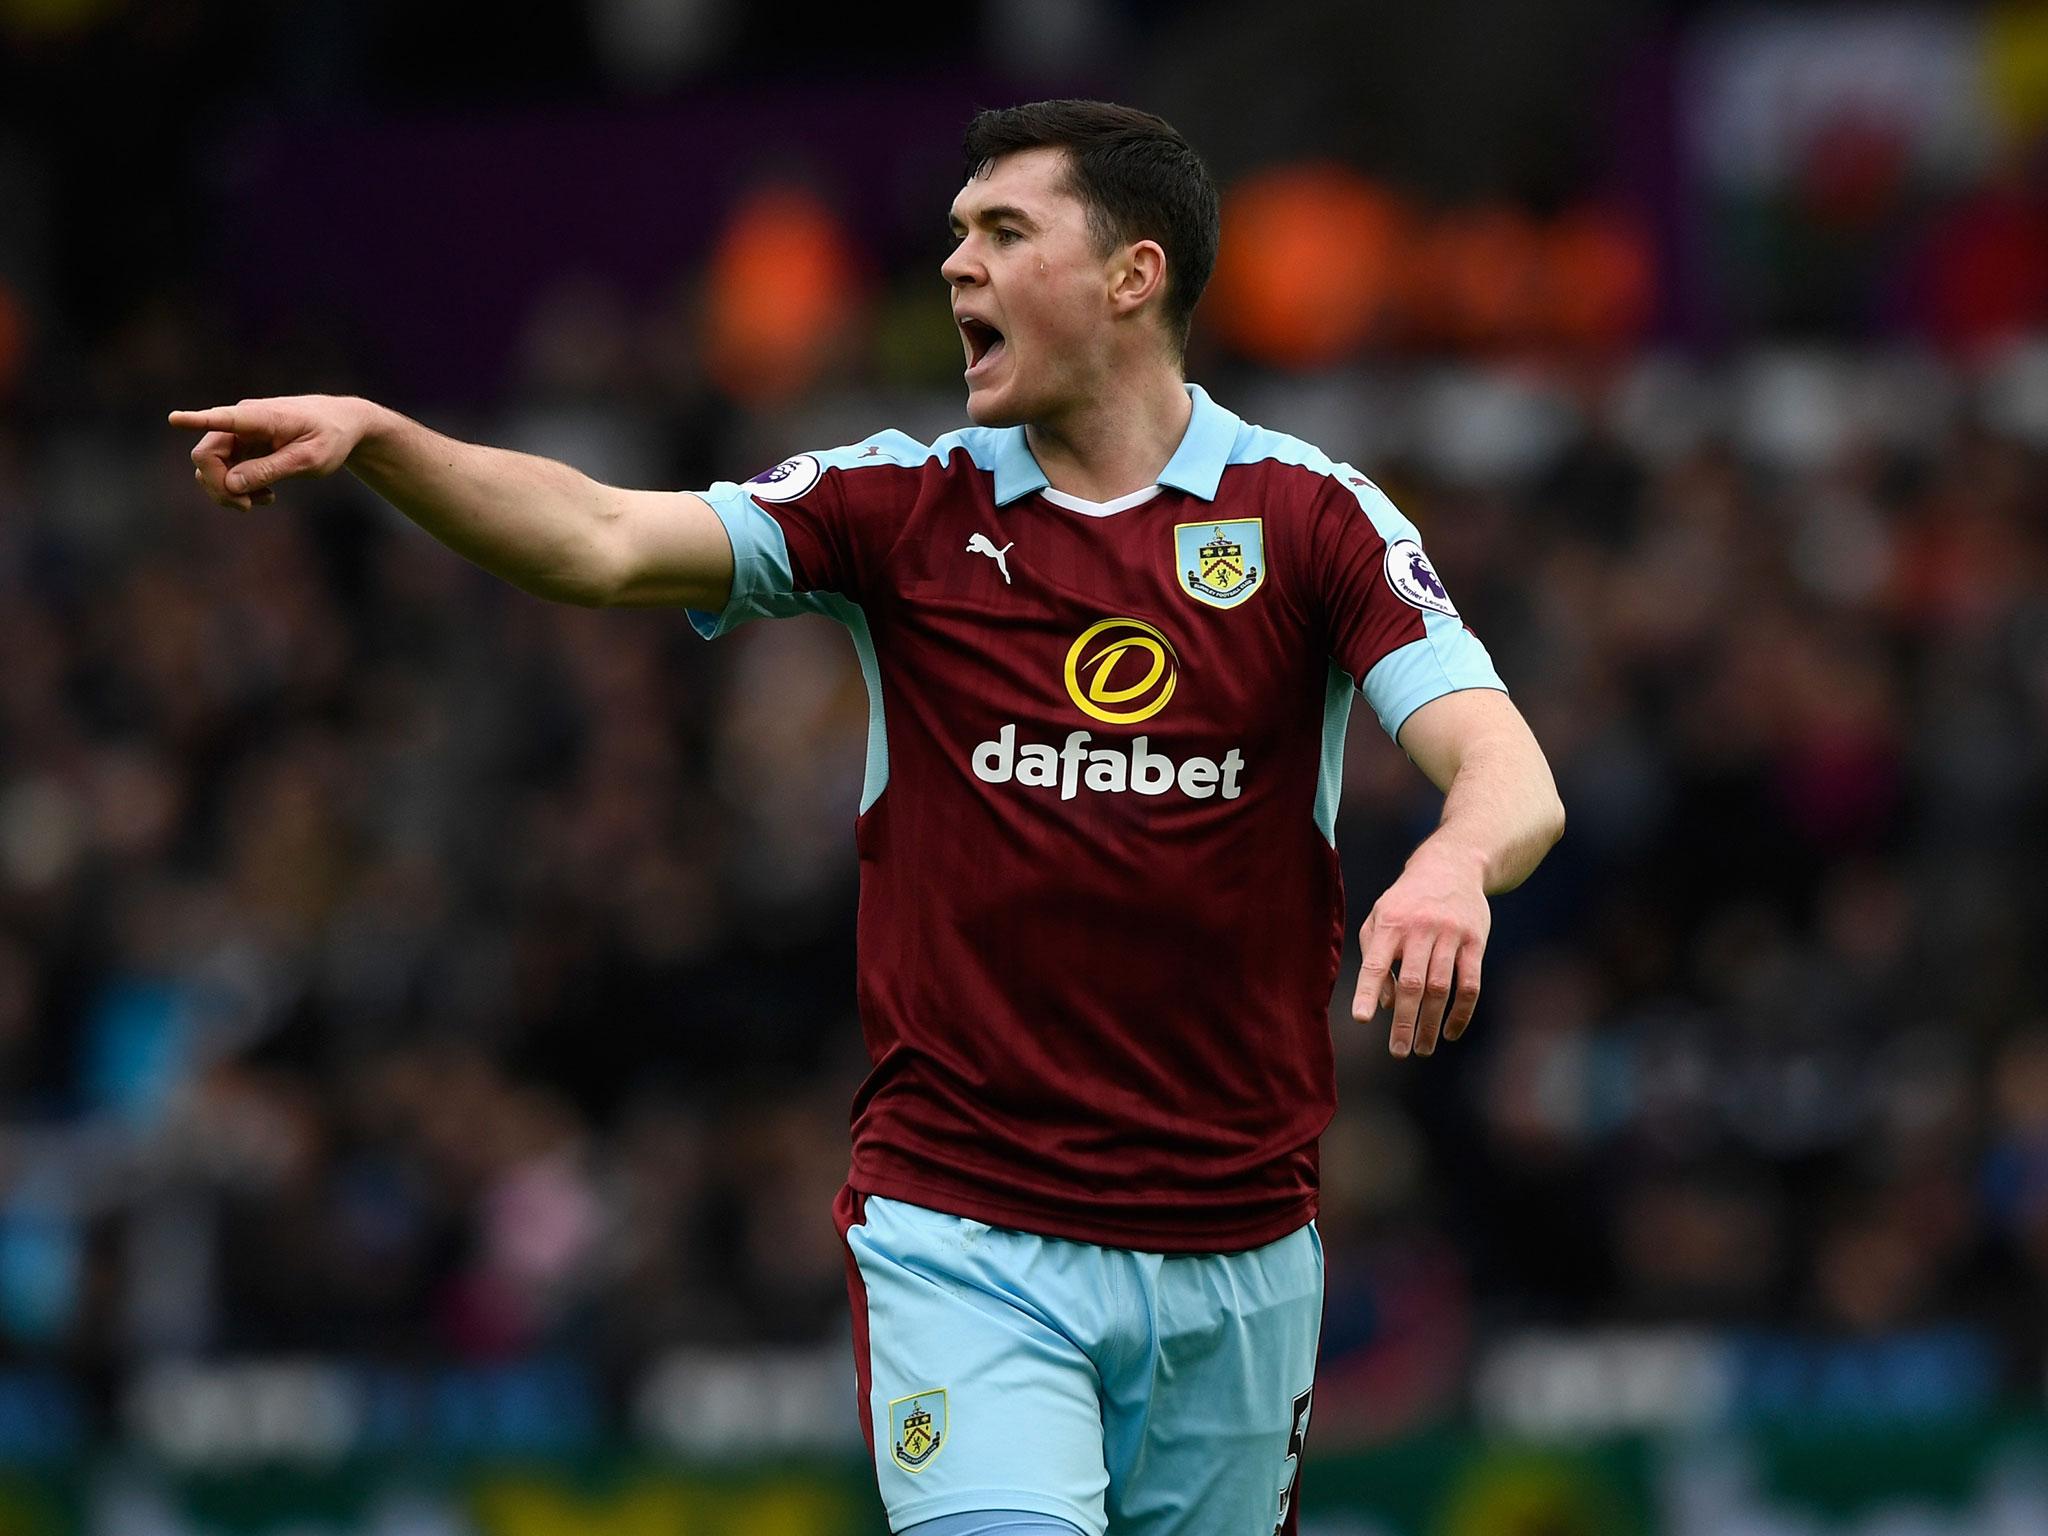 Michael Keane could be in line for a return to Manchester United in the summer